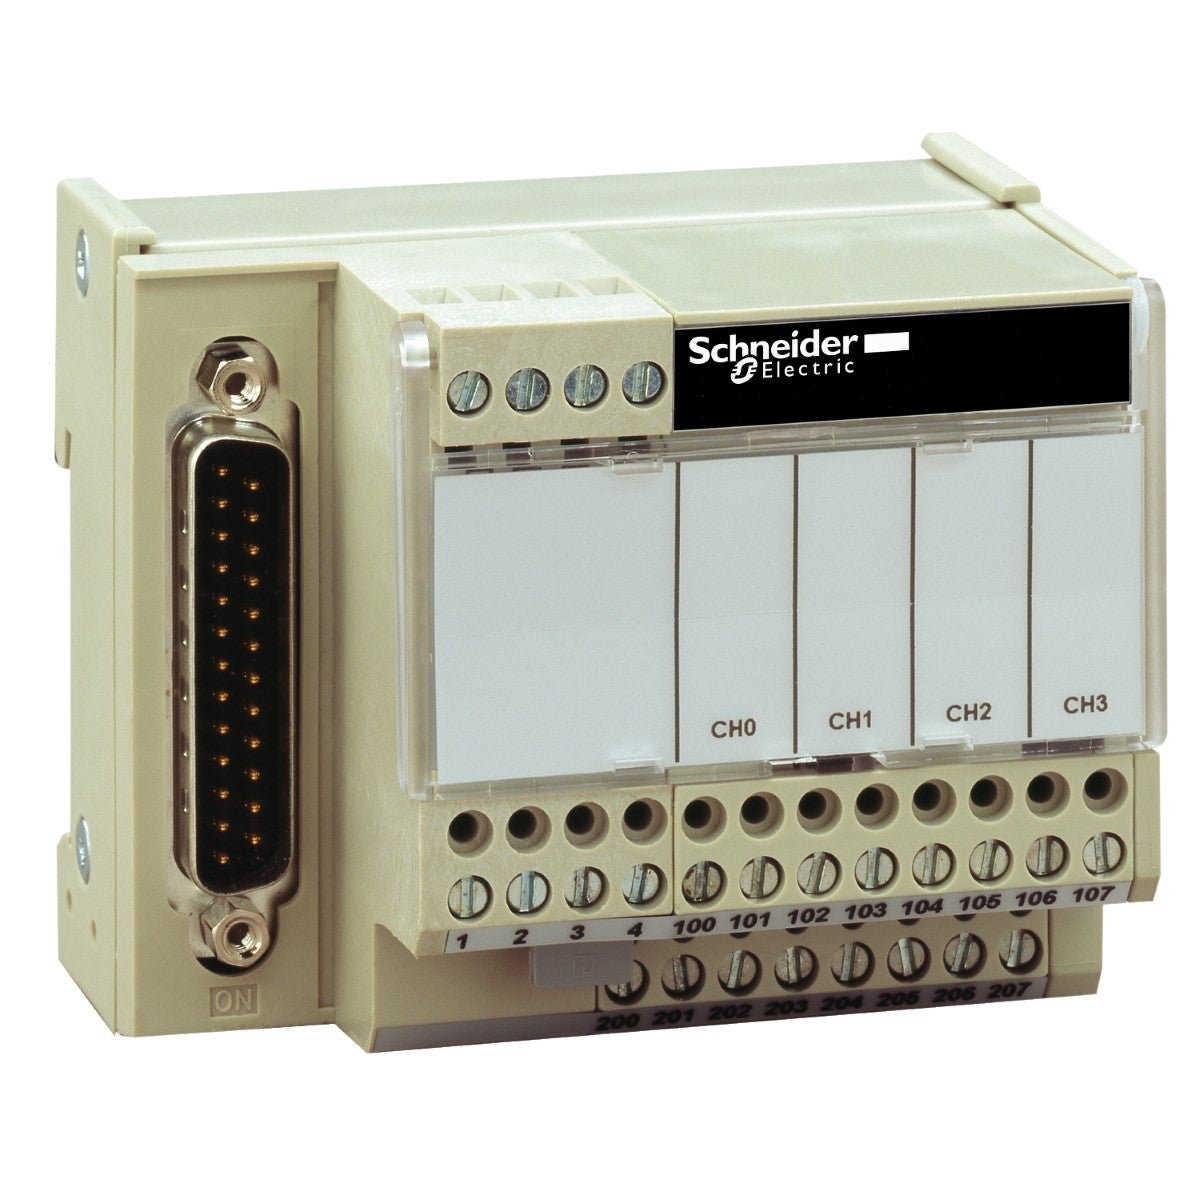 connection sub-base ABE7 - for distribution of 4 analog output channels